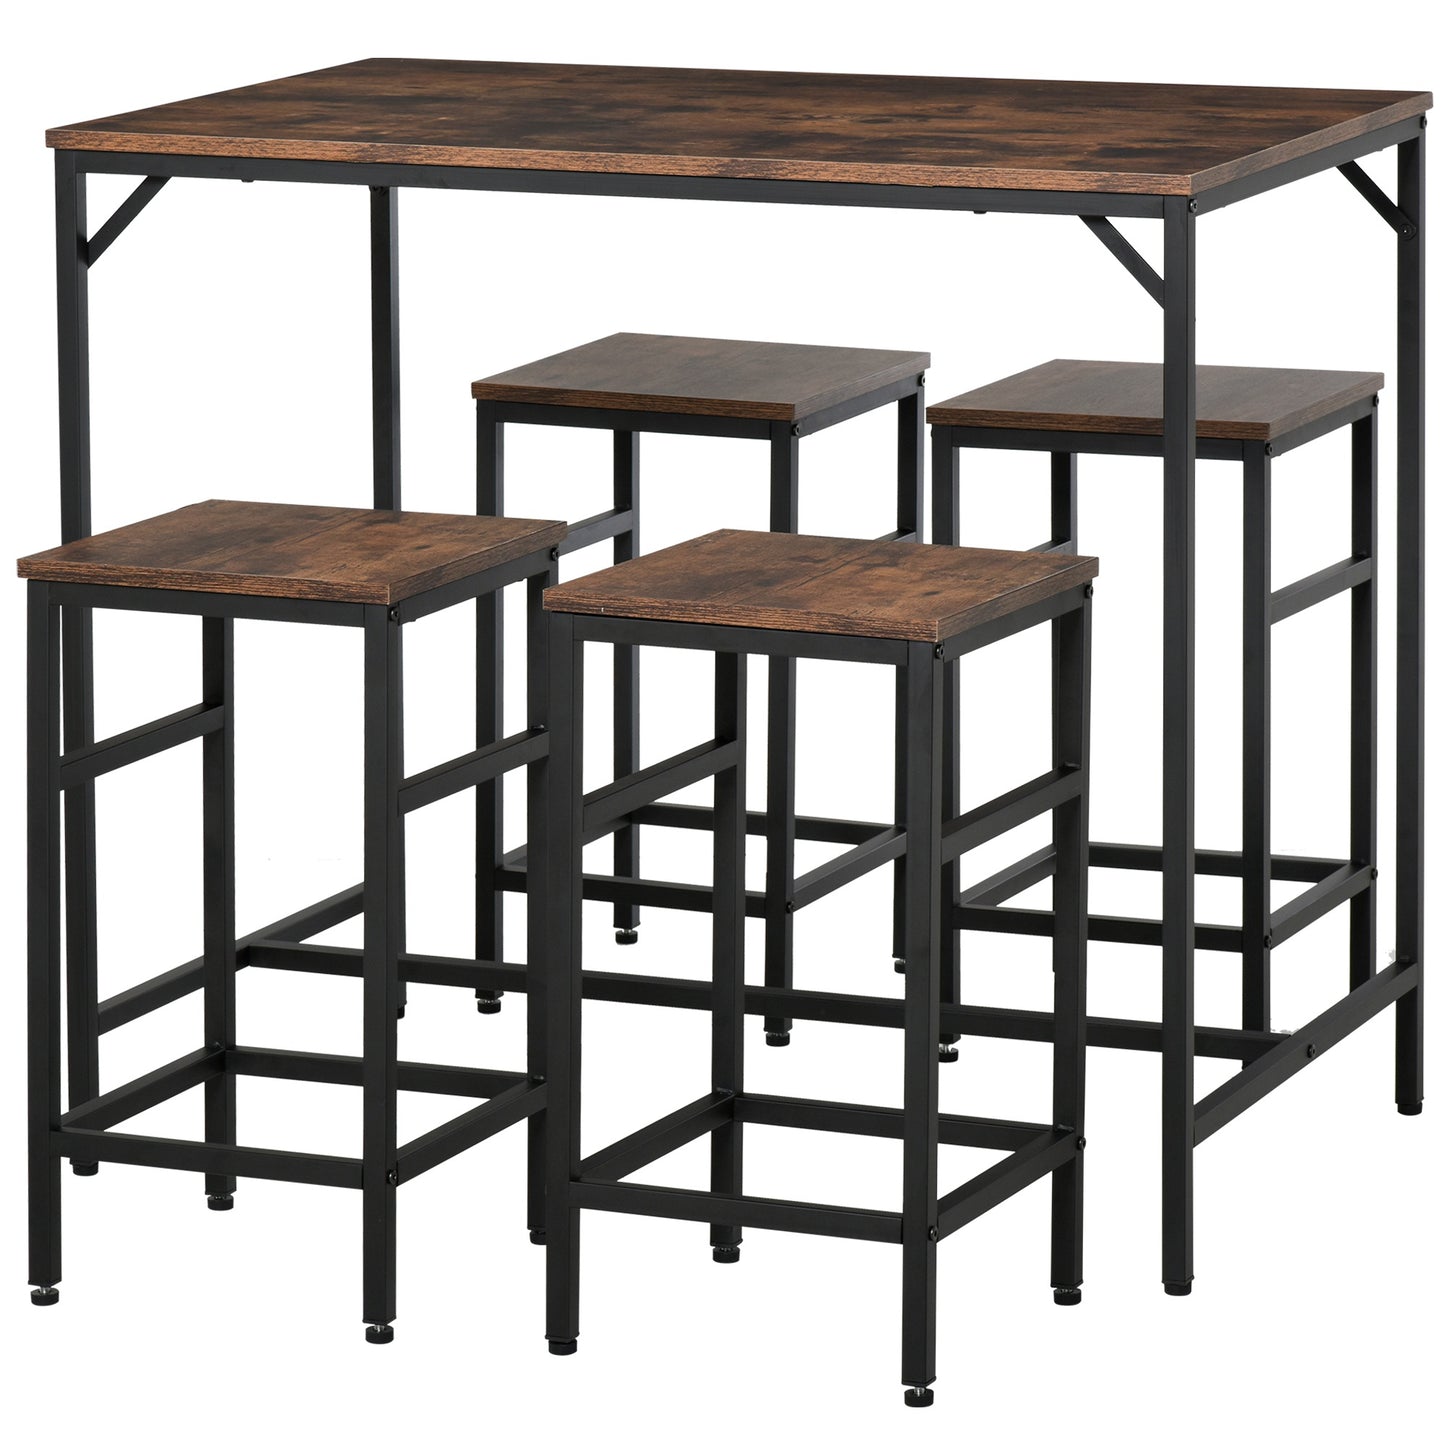 HOMCOM MDF Industrial 5-Piece Dining Set Dining Table with 4 Stools Black/Brown